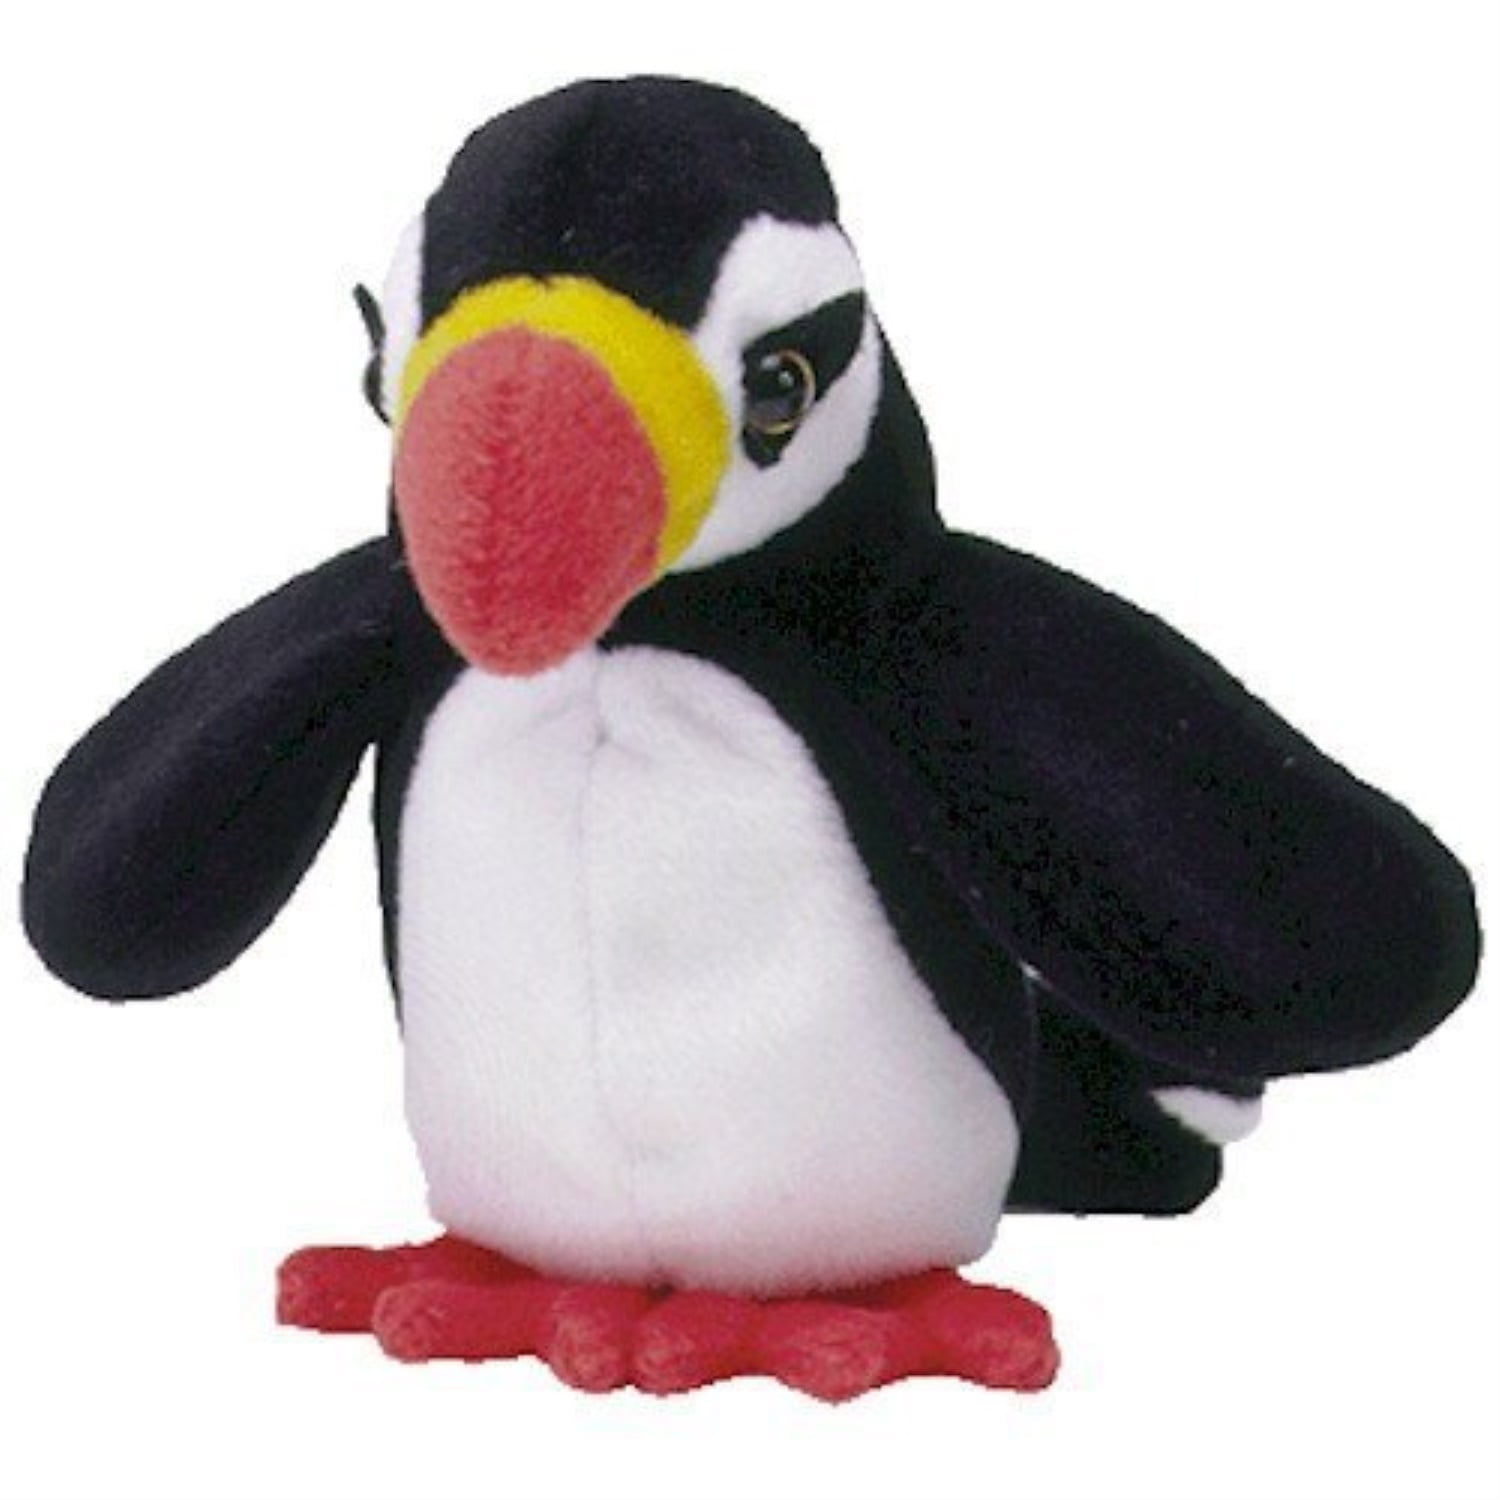 Ty Beanie Baby Puffer Puffin Plush Stuffed Animal Retired November 3 1997 for sale online 